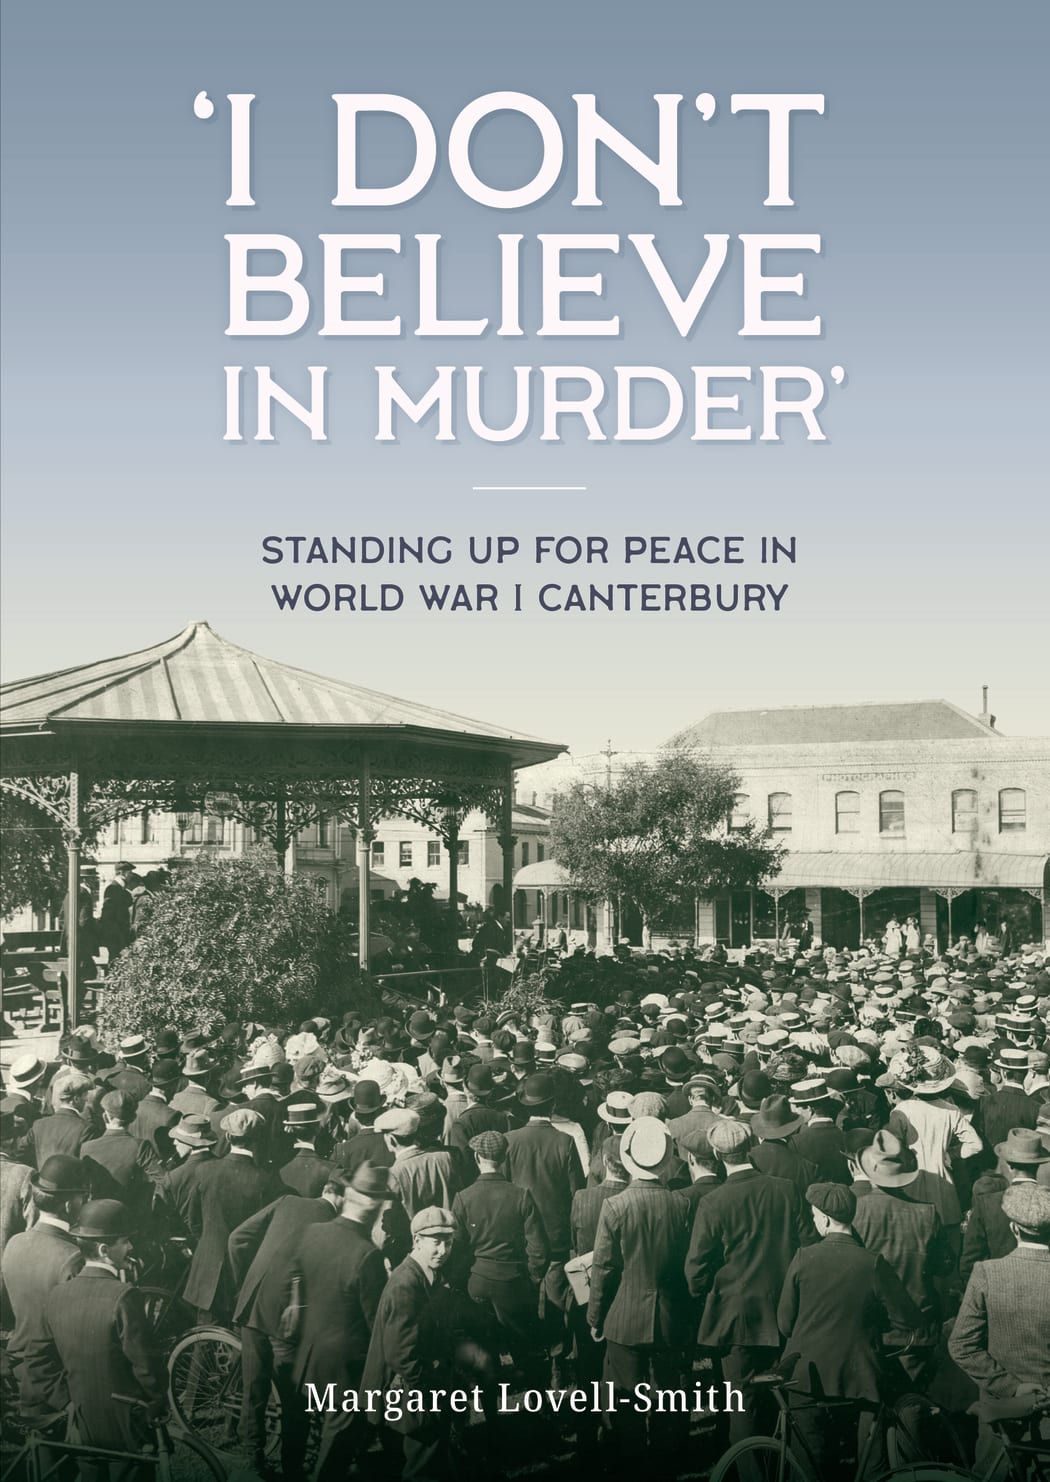 I Don't Believe in Murder: Standing up for peace in World War I Canterbury by Margaret Lovell-Smith